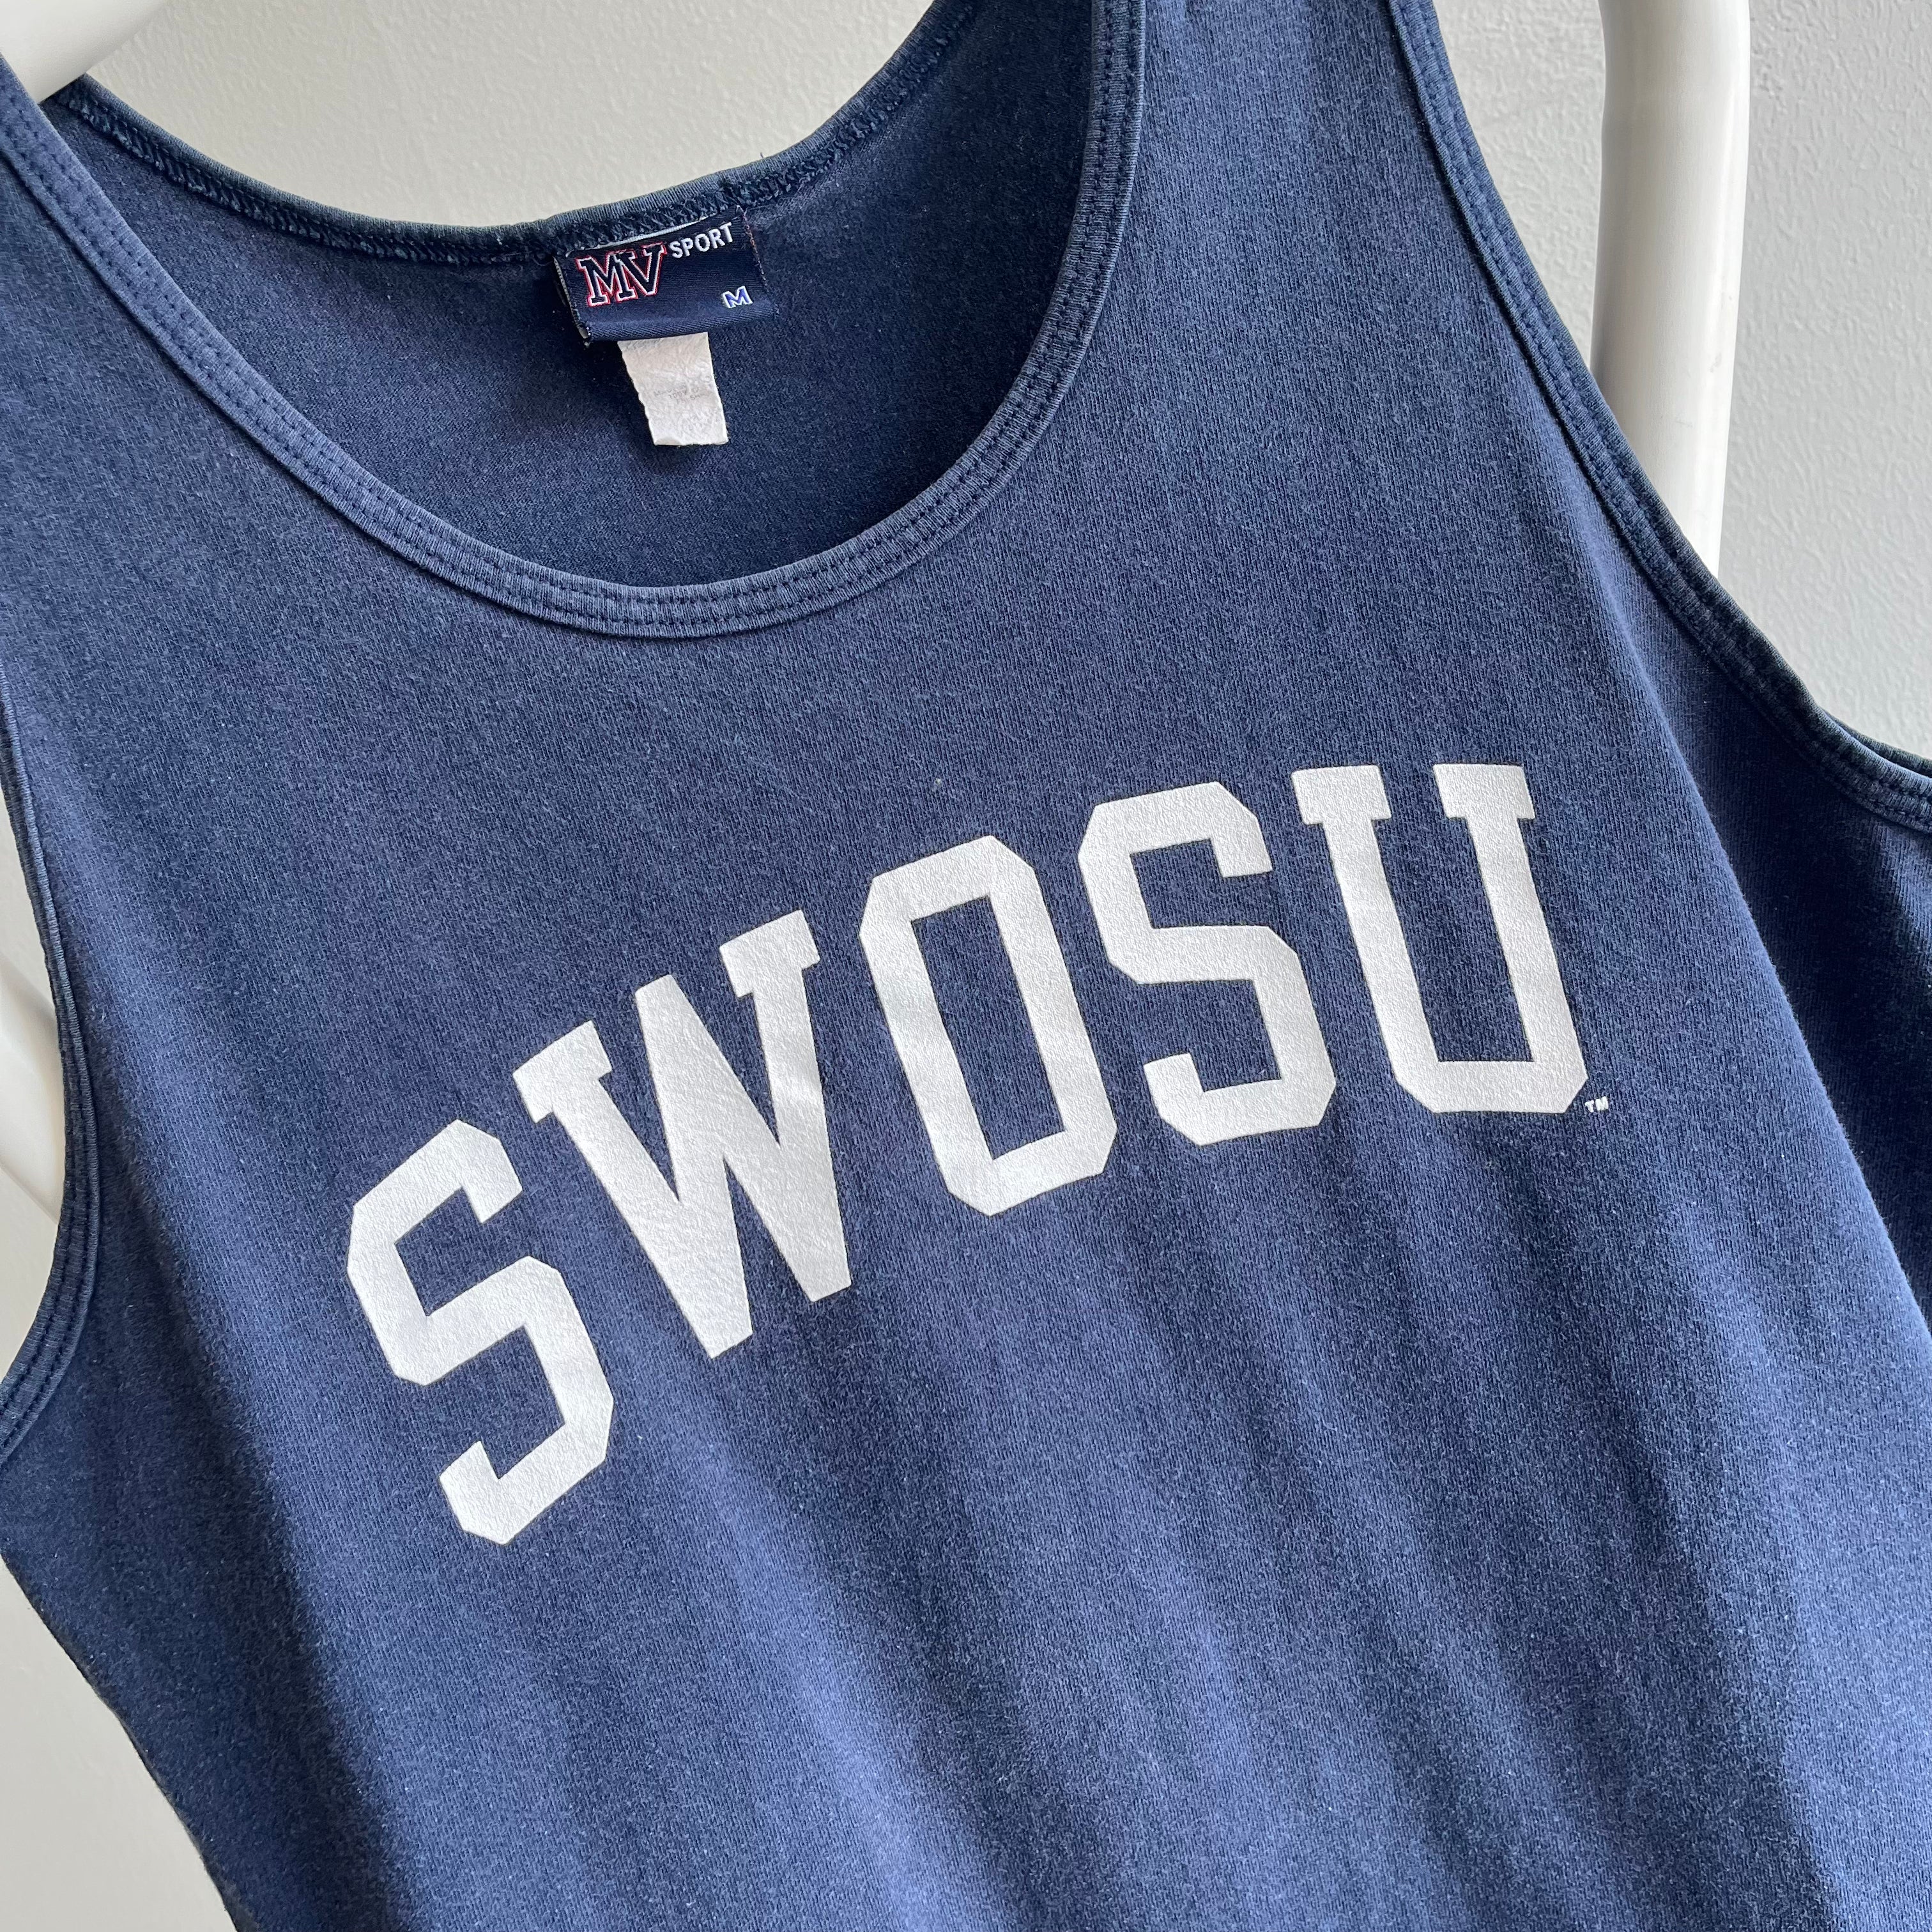 1980s South Western State University Cotton Tank Top